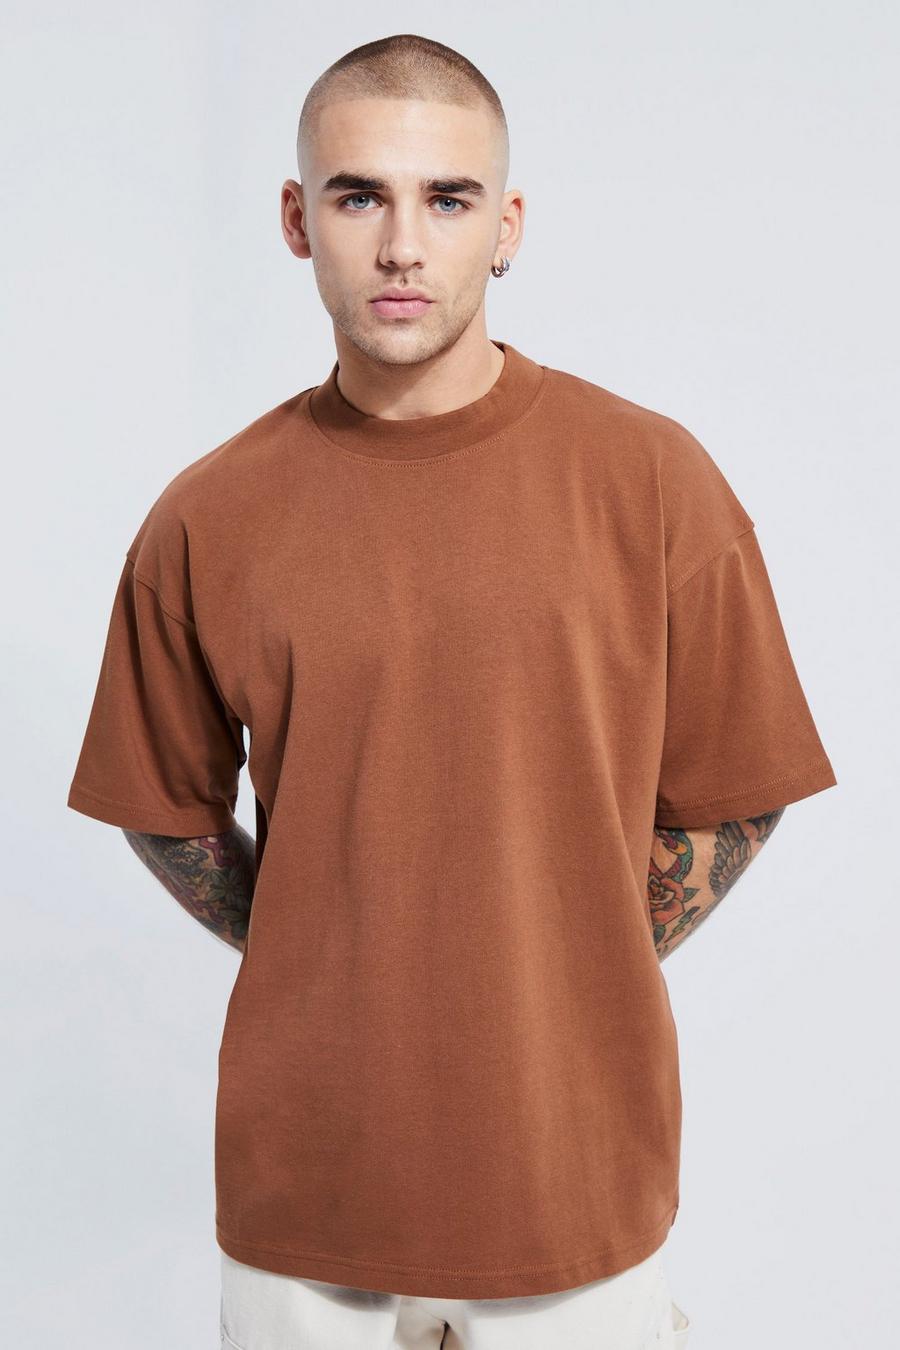 Tobacco brown Oversized Extended Neck Heavy T-shirt